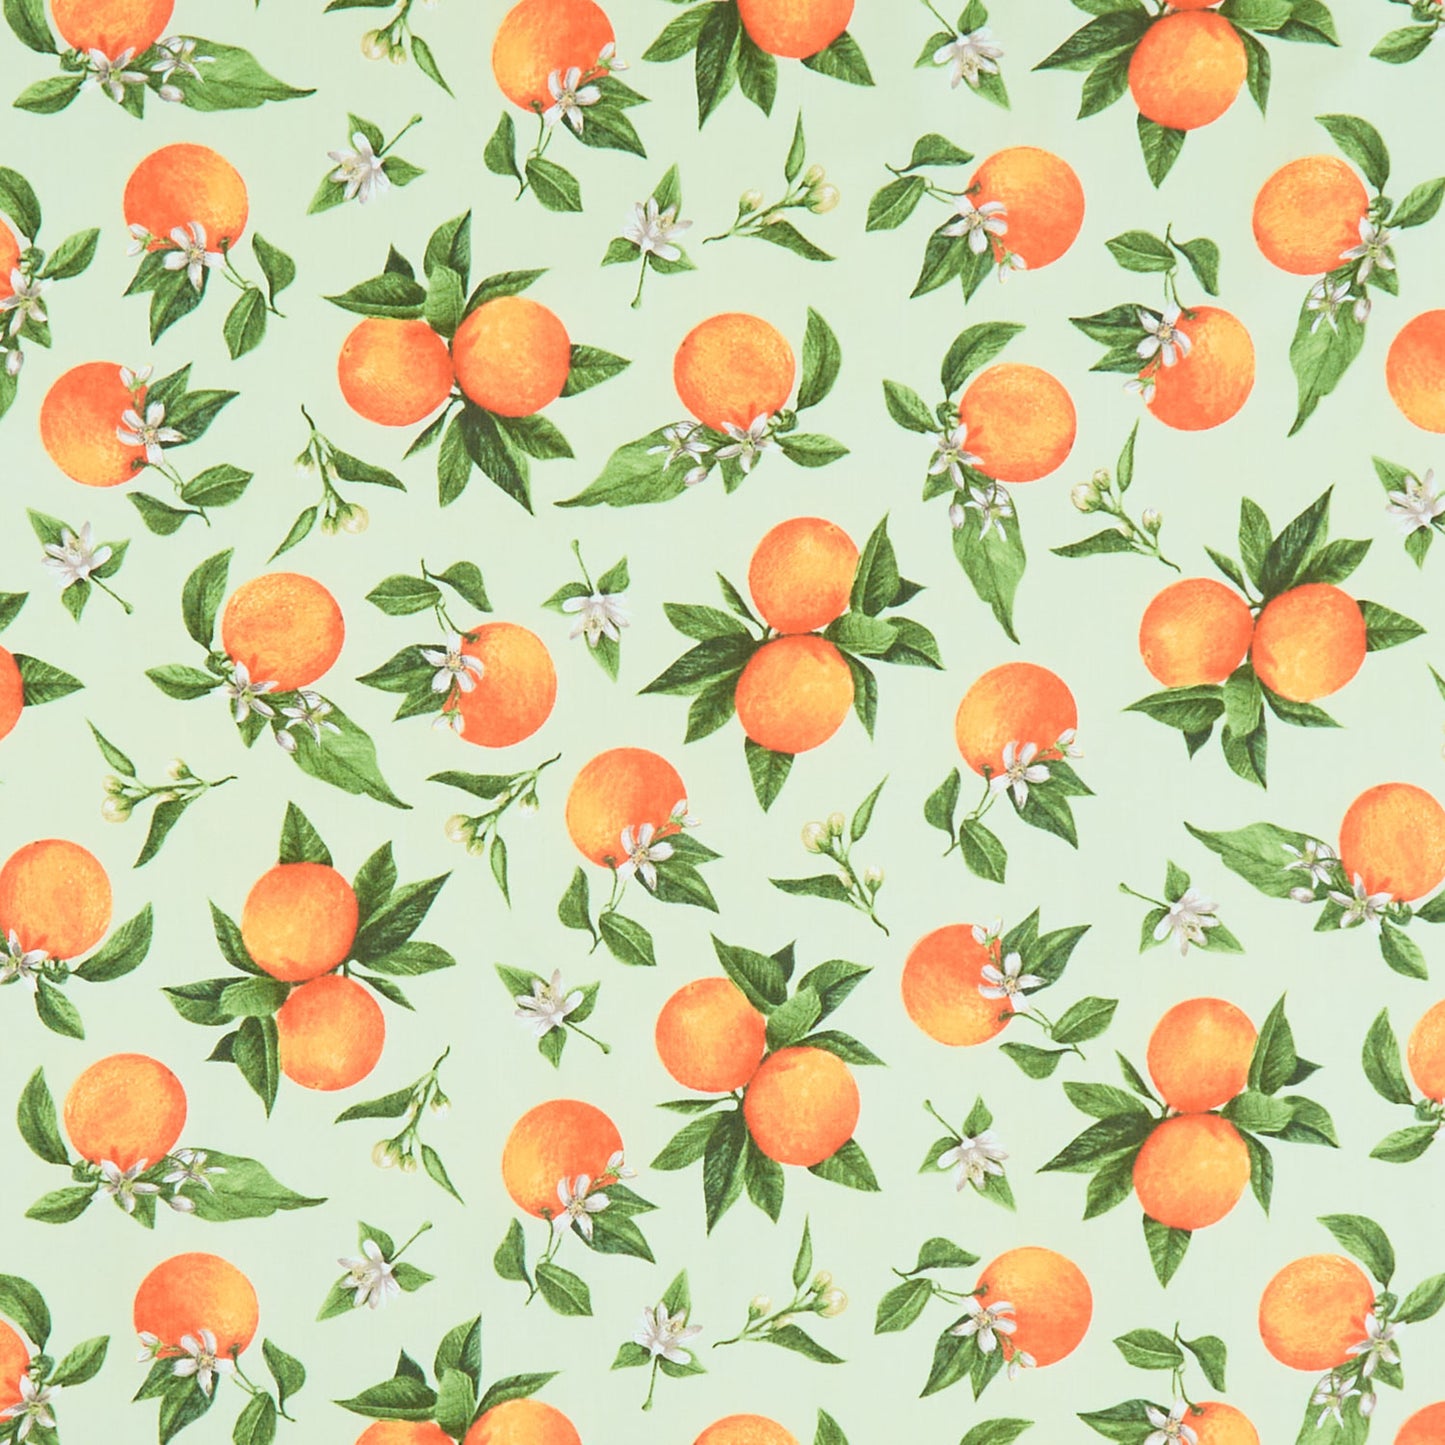 Monthly Placemat Coordinate - Oranges Mint Yardage Primary Image